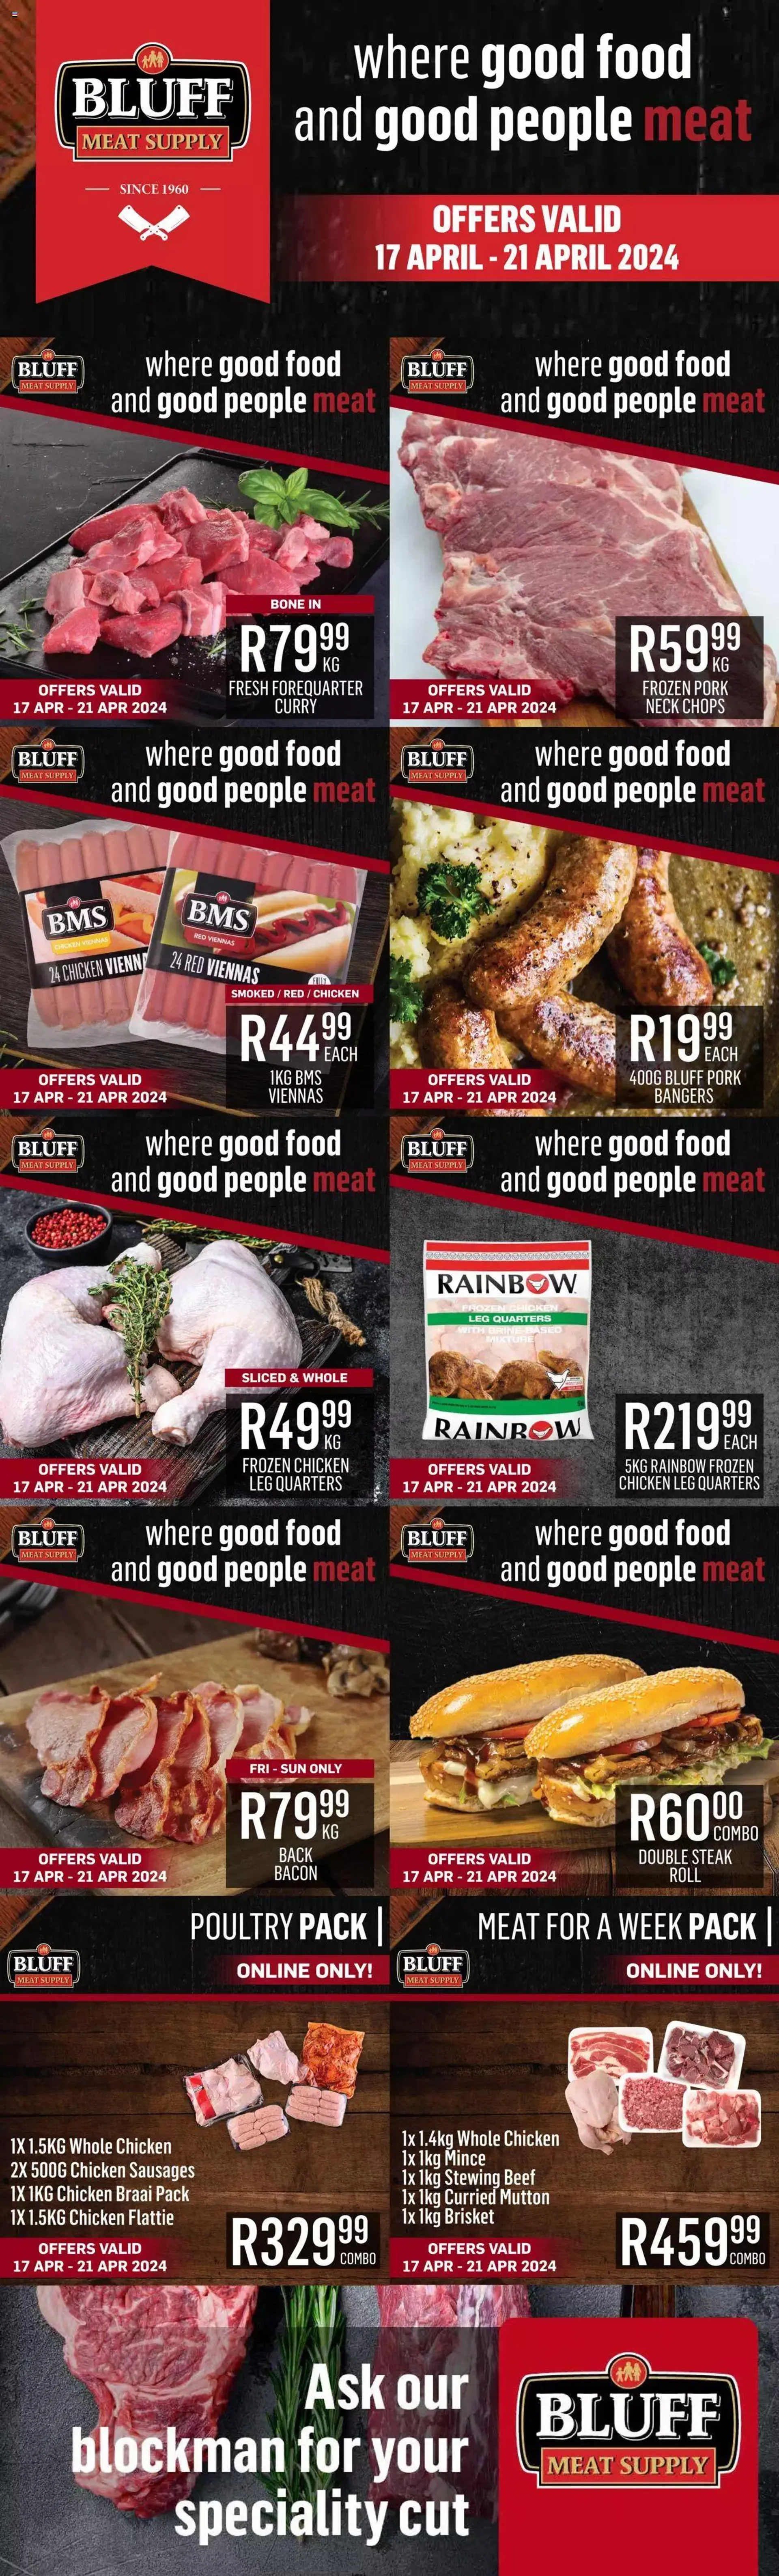 Bluff Meat Supply - Weekly Specials - 0